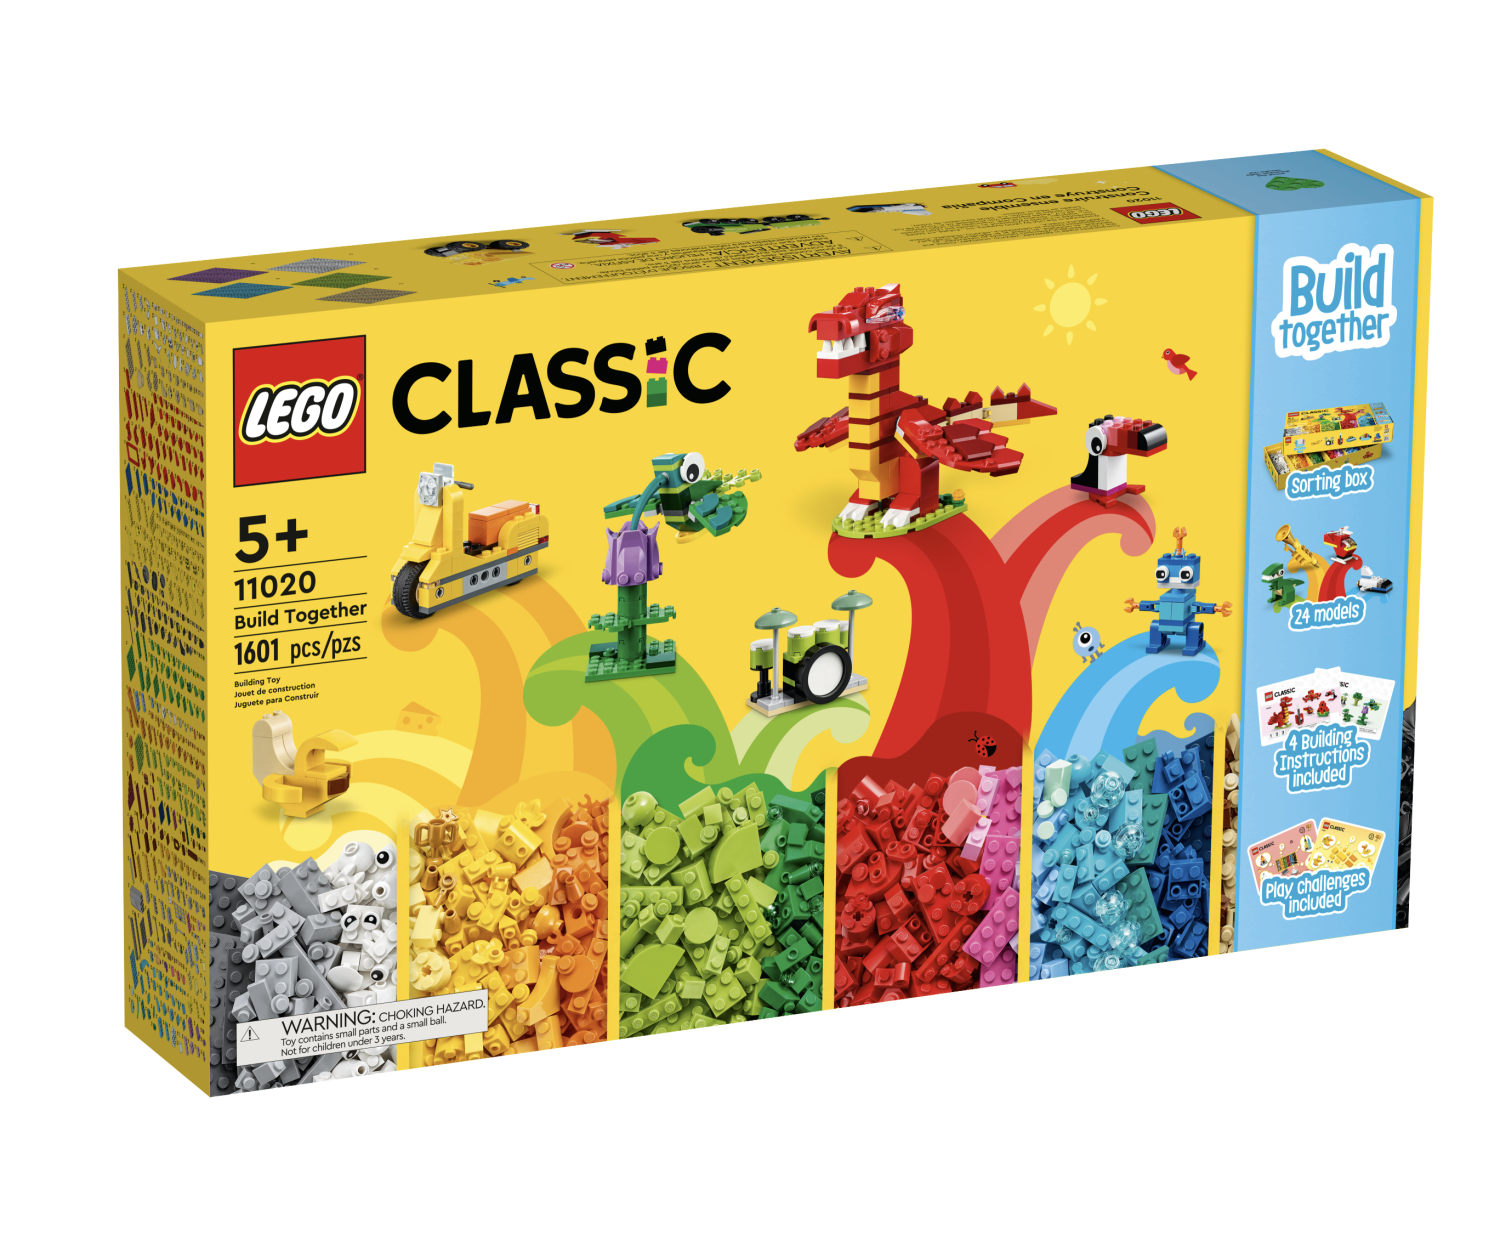 LEGO Classic Creative Party Brick Box Building Set Toy 900 Piece for Ages 5+